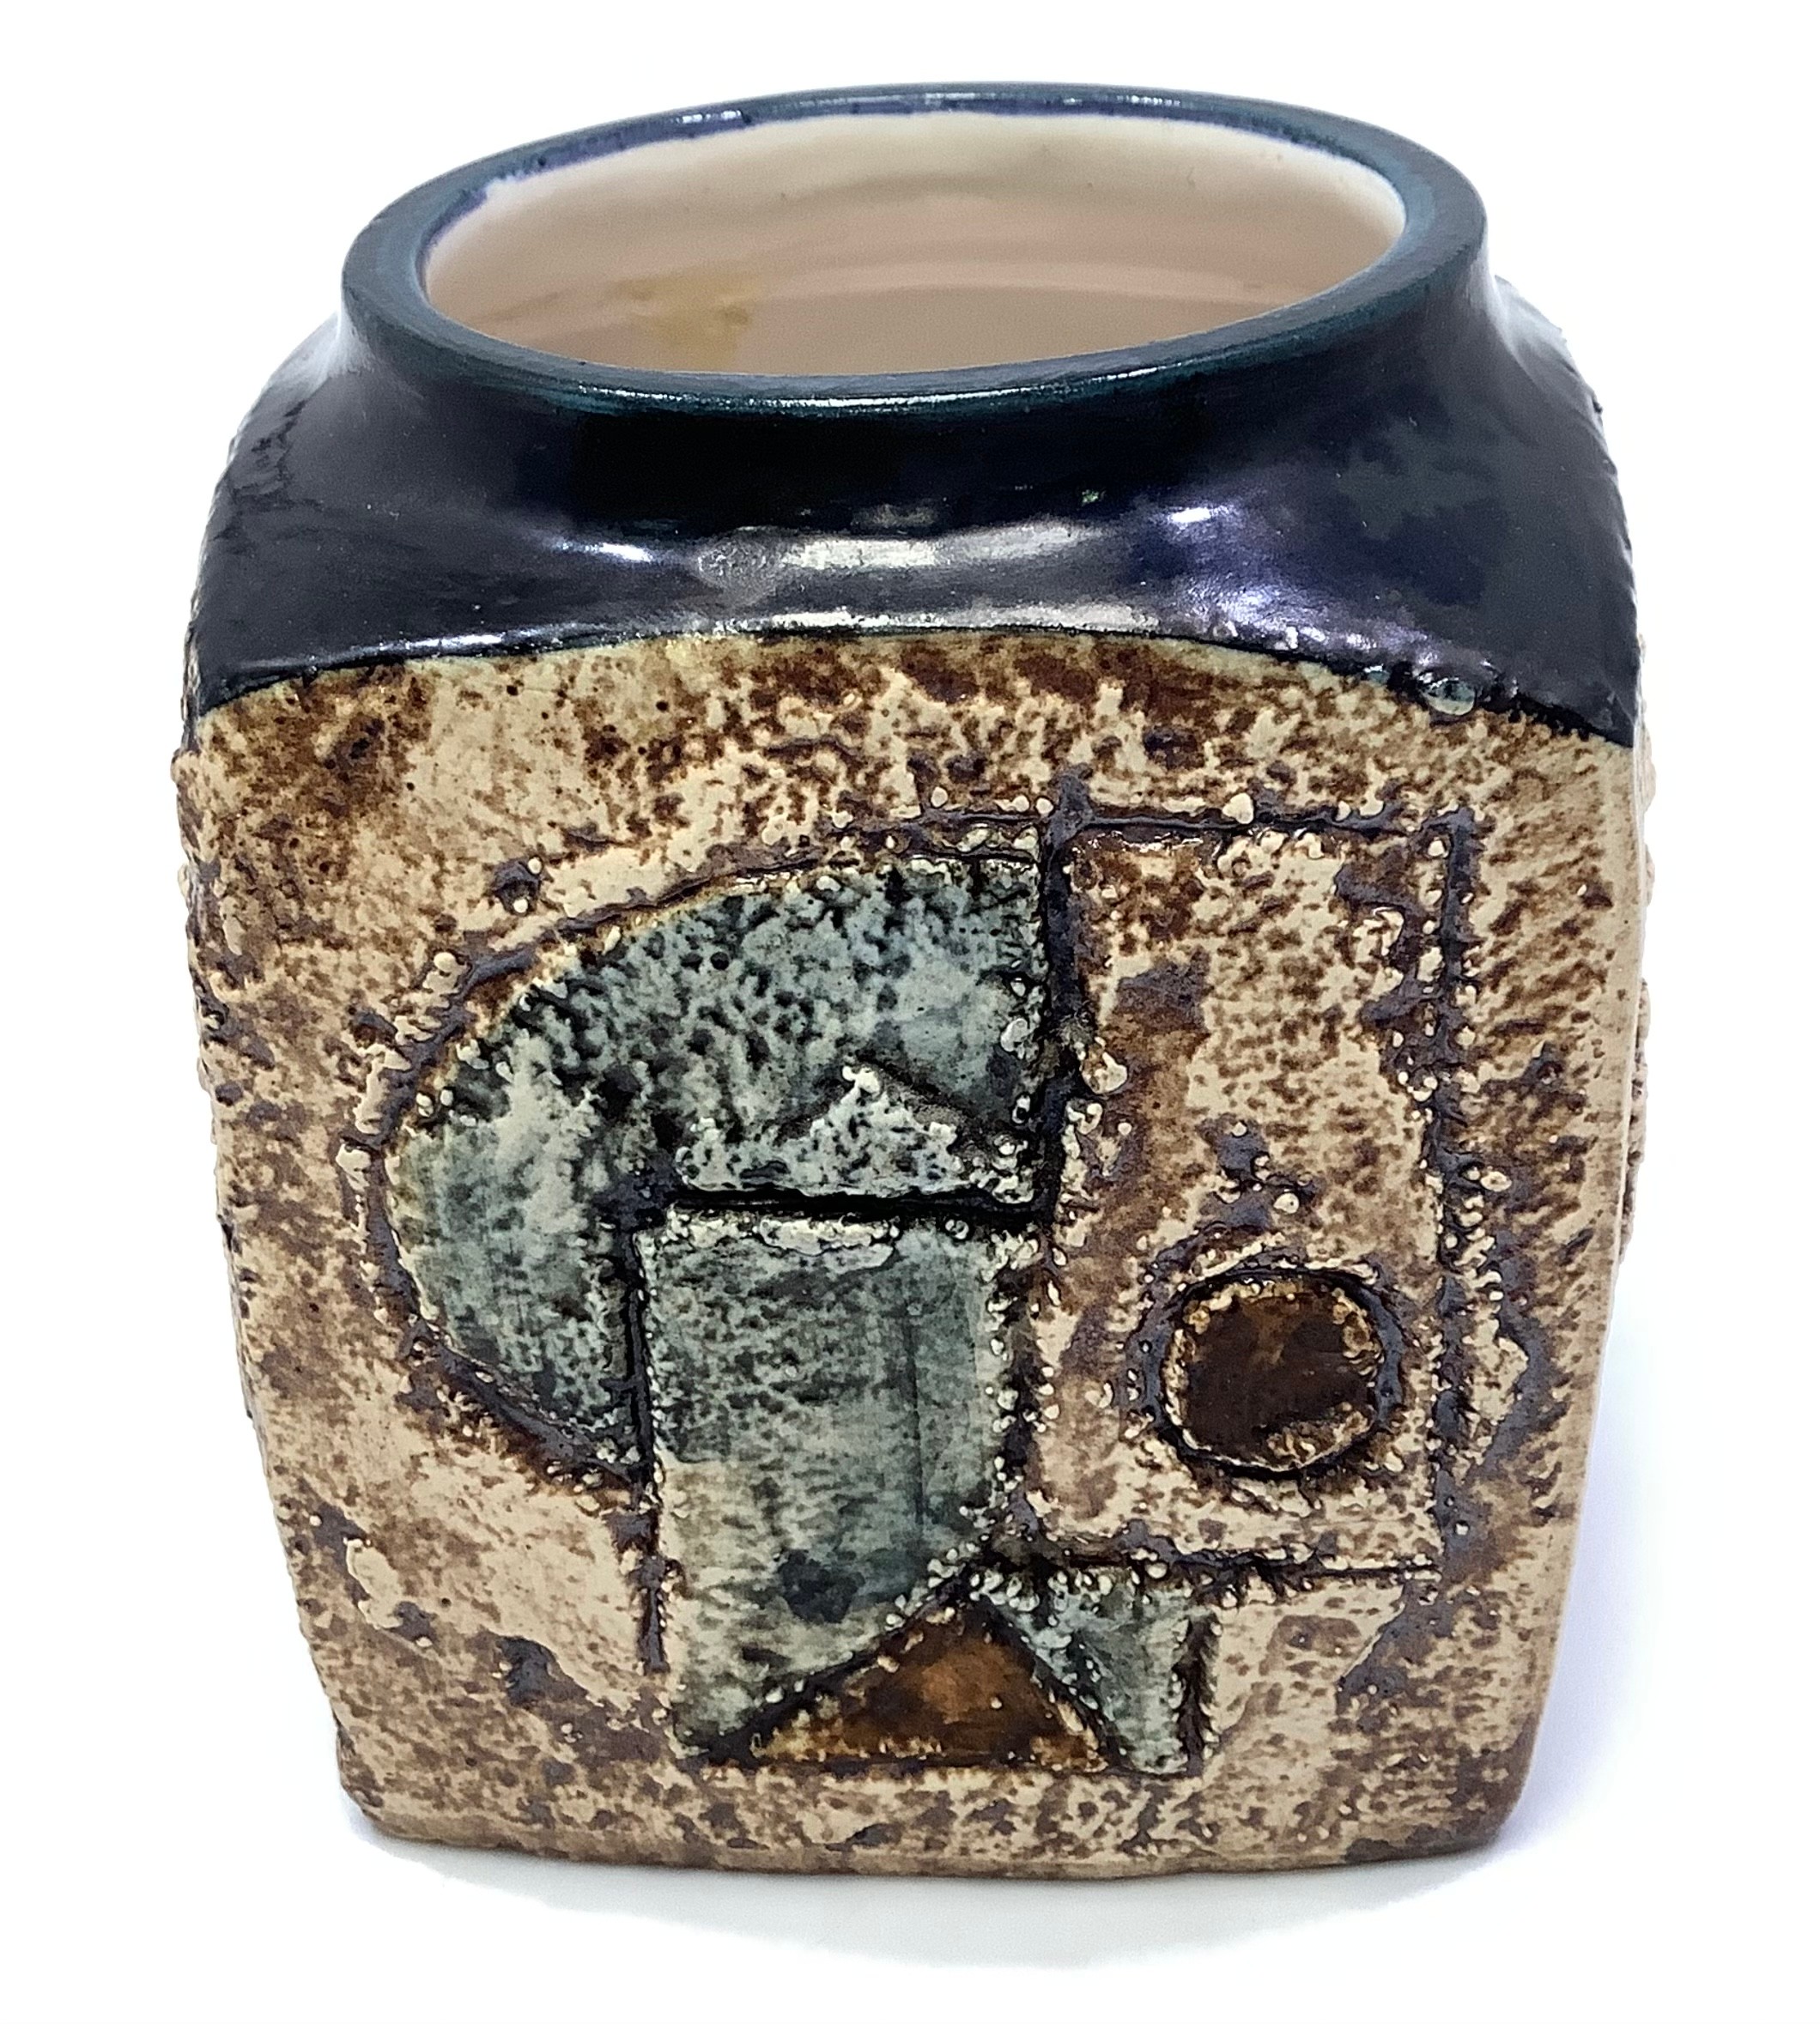 A Troika Pottery marmalade pot decorated by Teo Bernatowitz, with incised and painted abstract